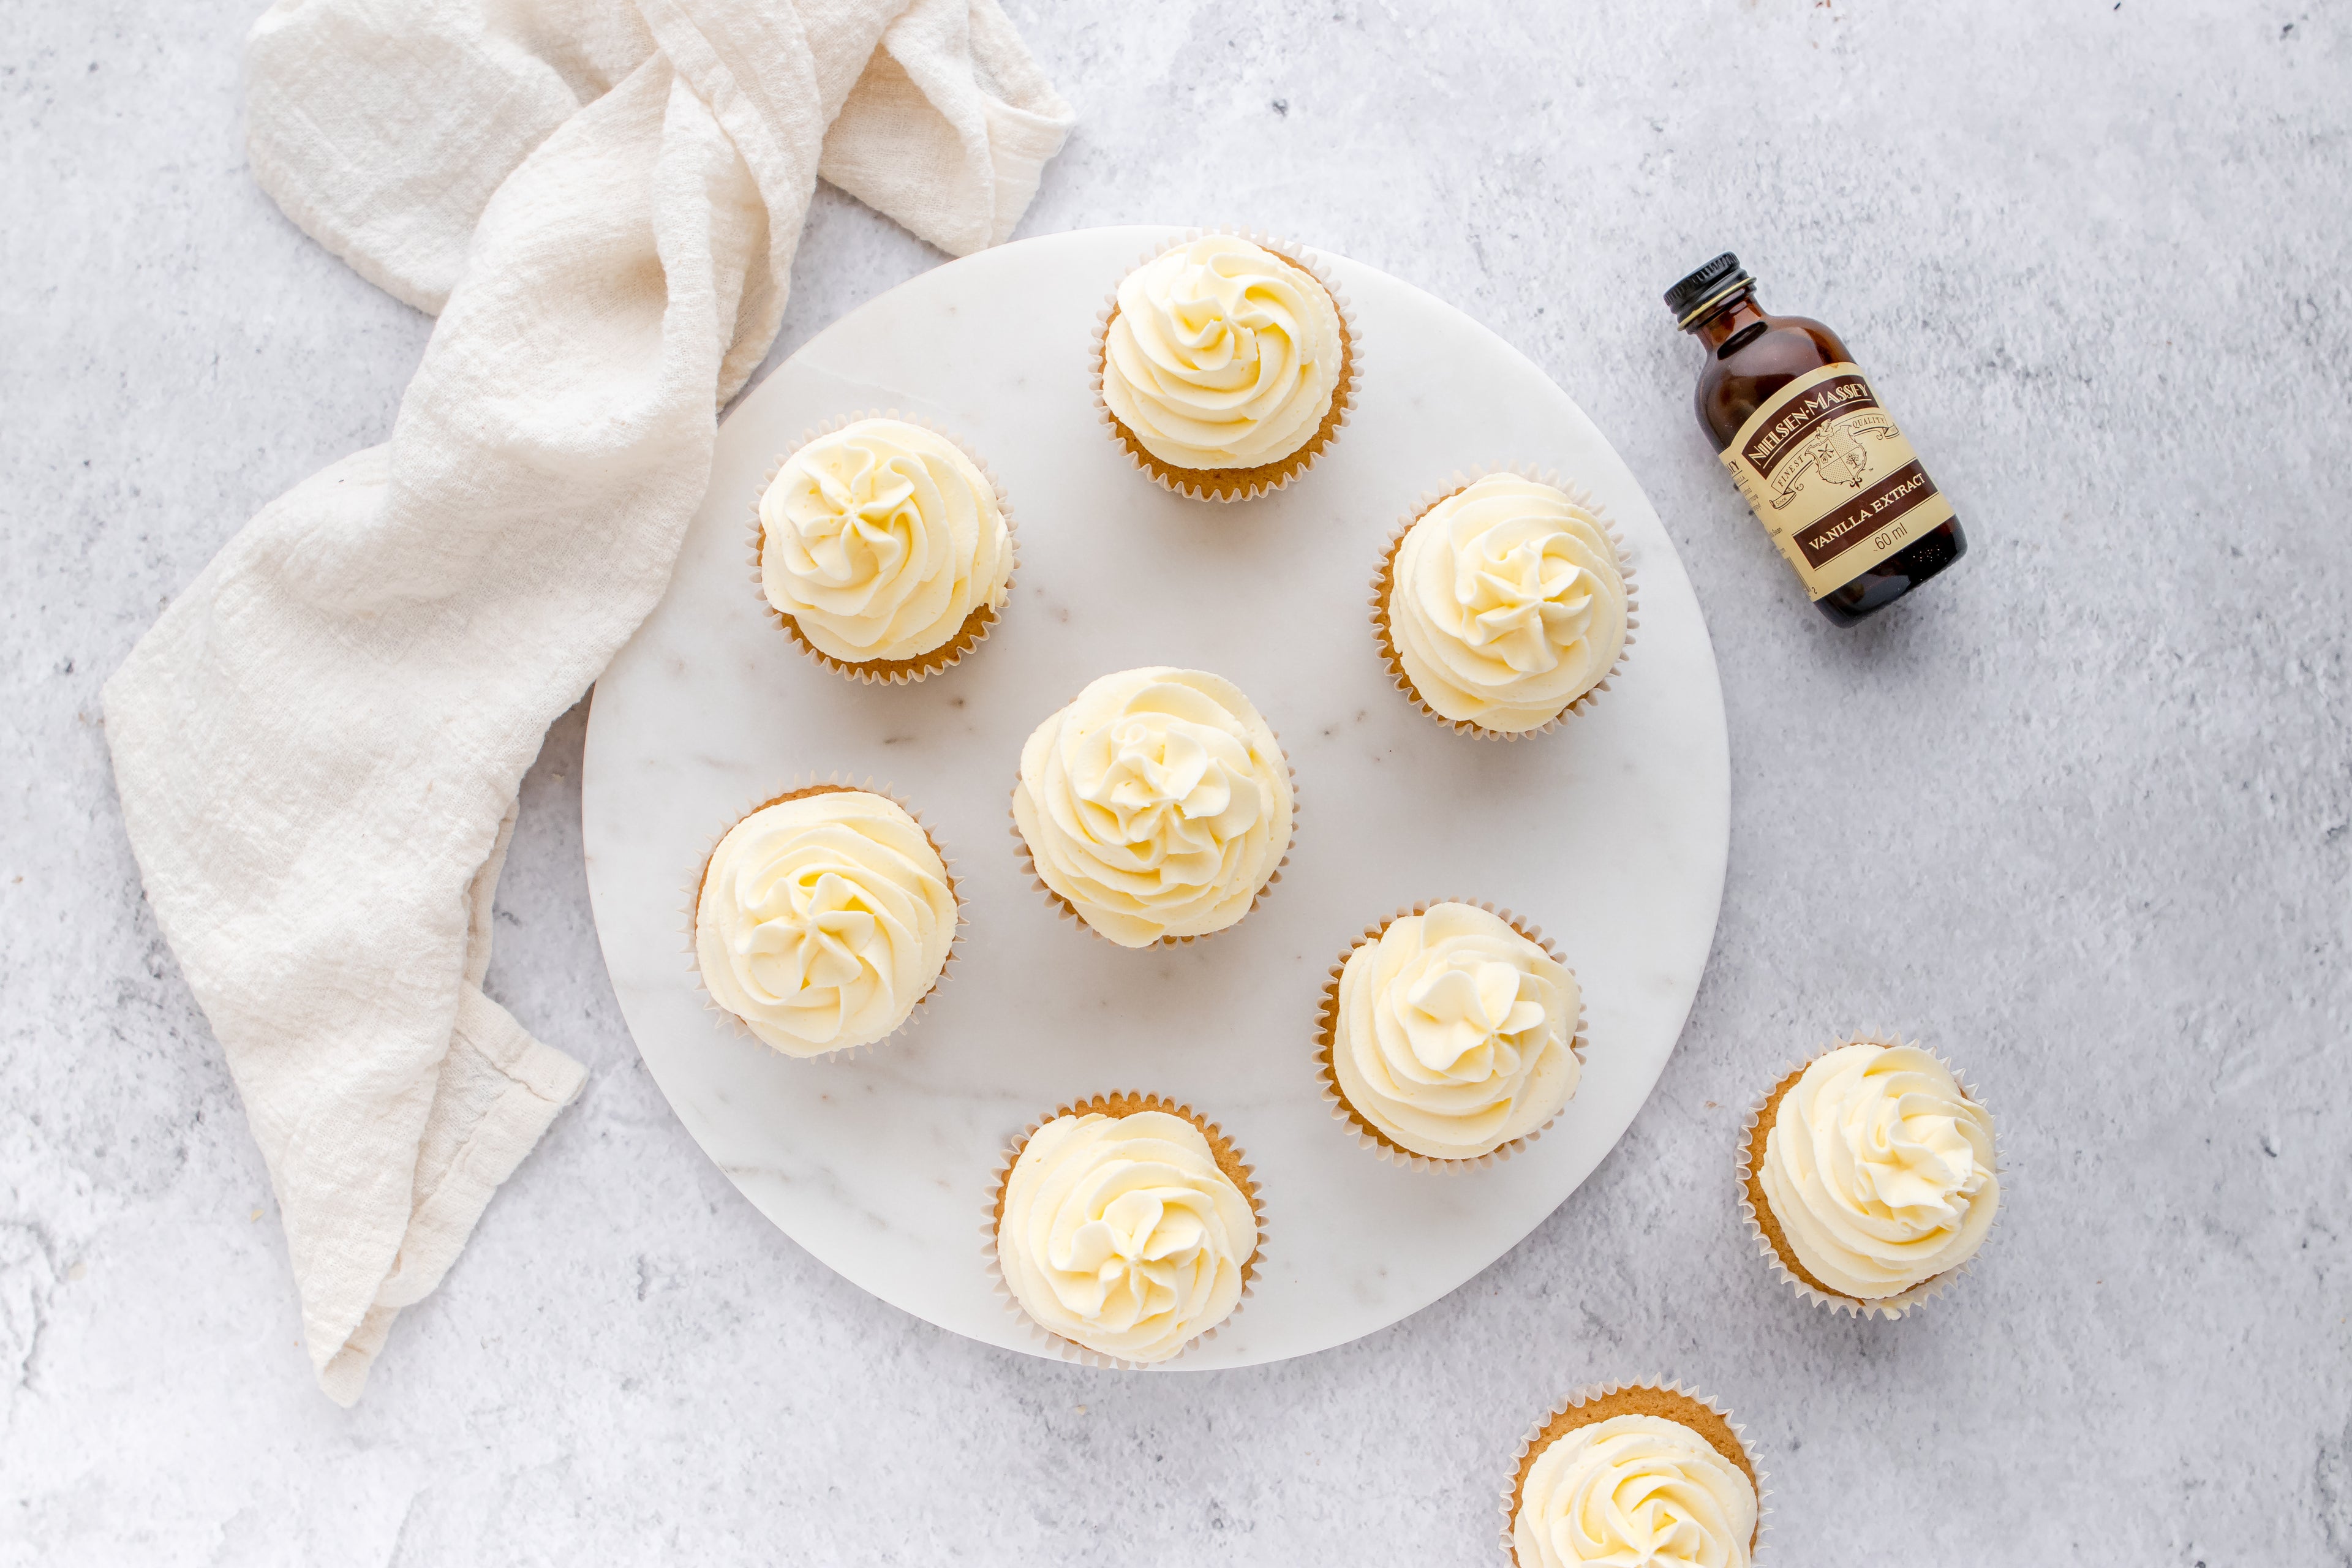 Gluten Free Cupcakes from above view with a bottle of Neilsen-Massey vanilla extract lay next to the serving board